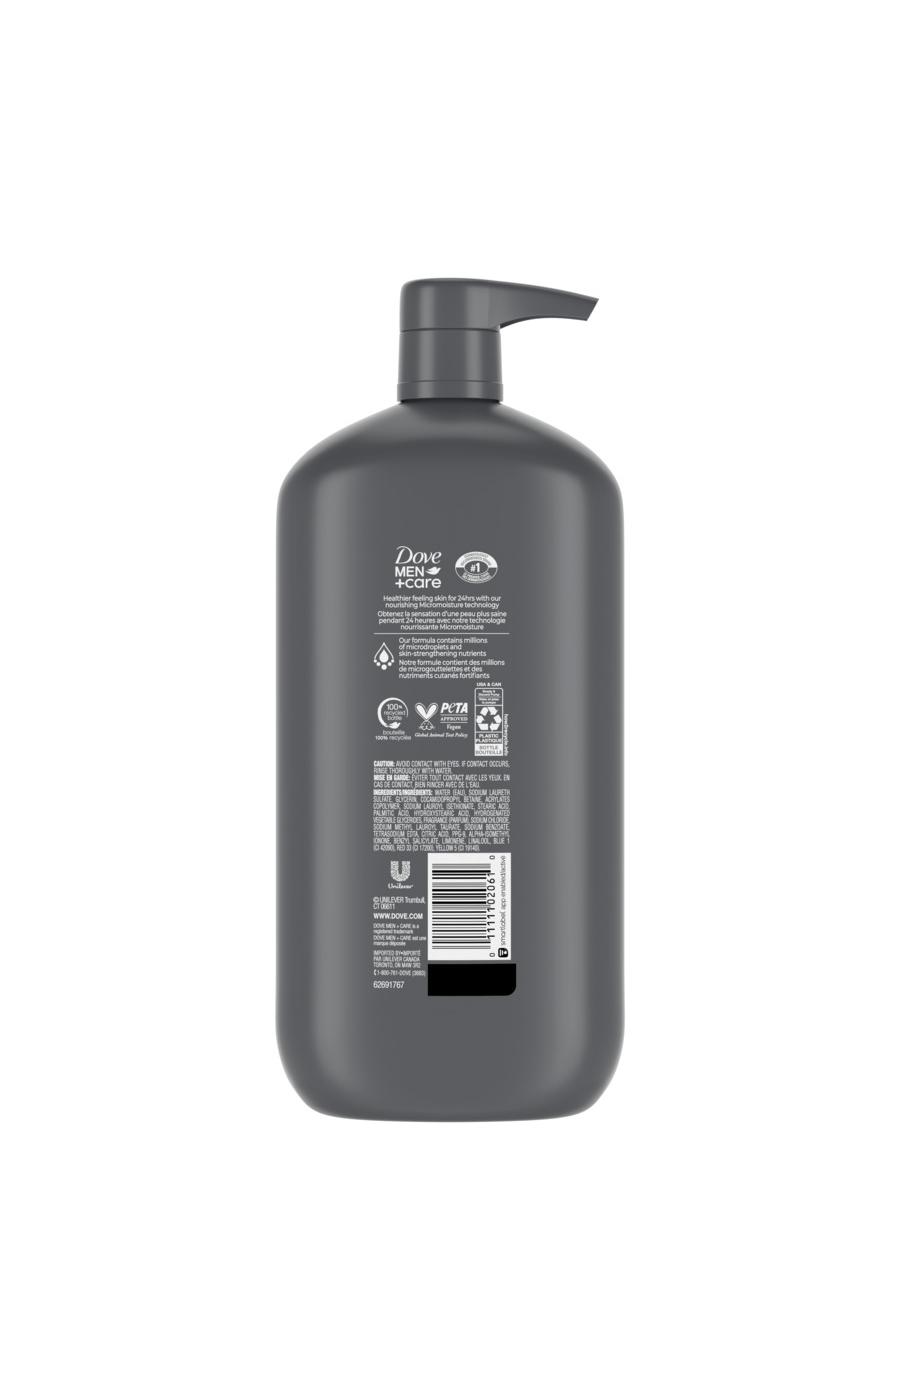 Dove Men+Care Hydrating Body + Face Wash - Clean Comfort; image 6 of 6